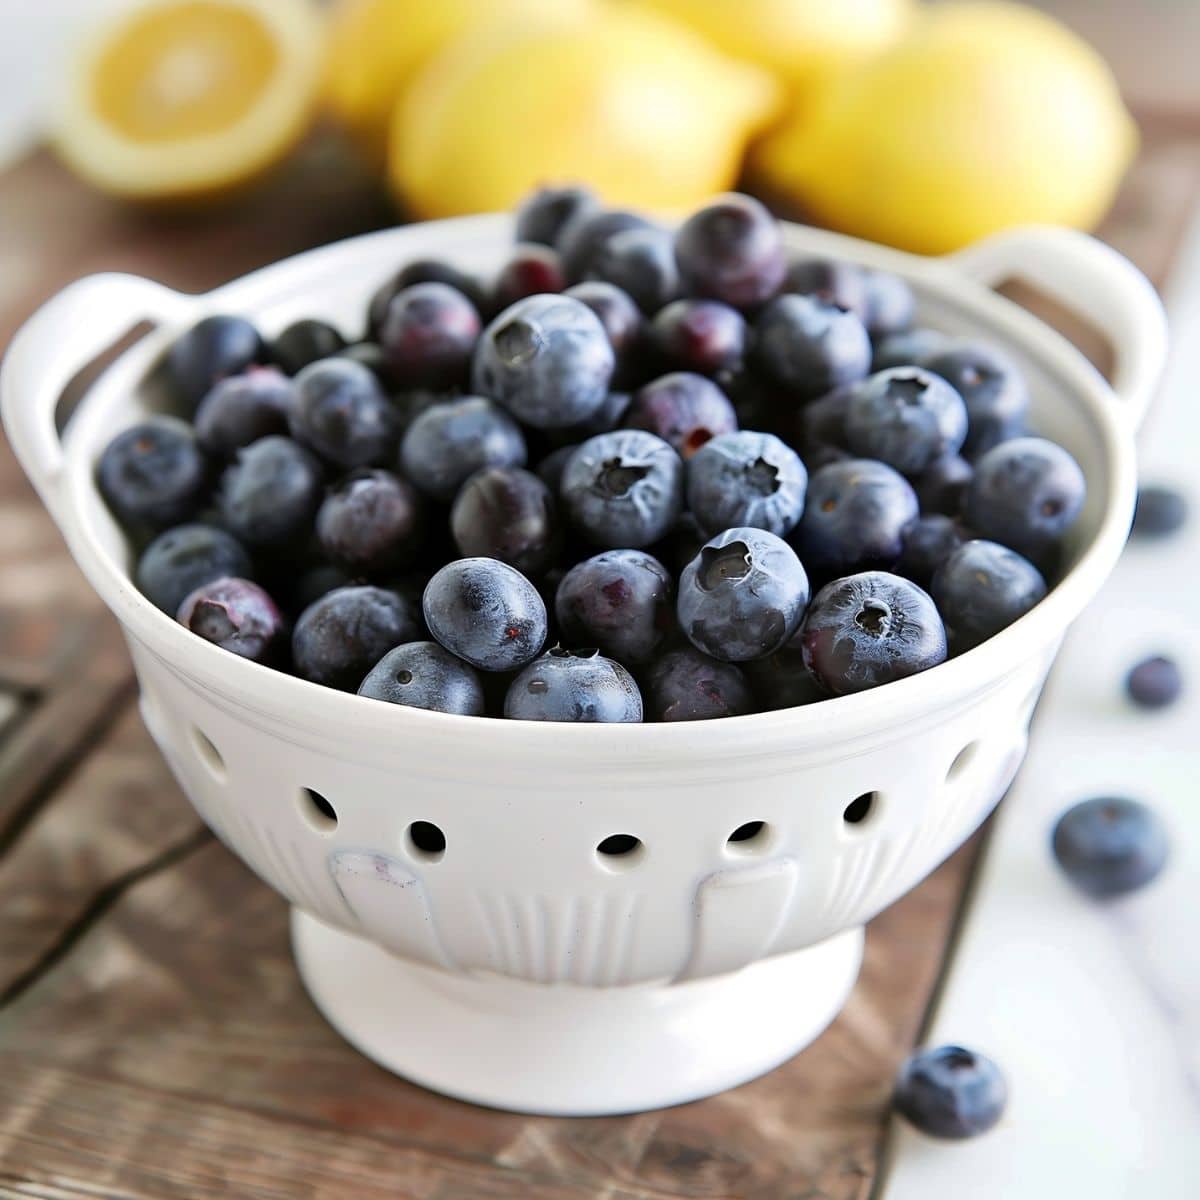 Colander of Blueberries on a Wooden Cutting Board with Lemons in the Background